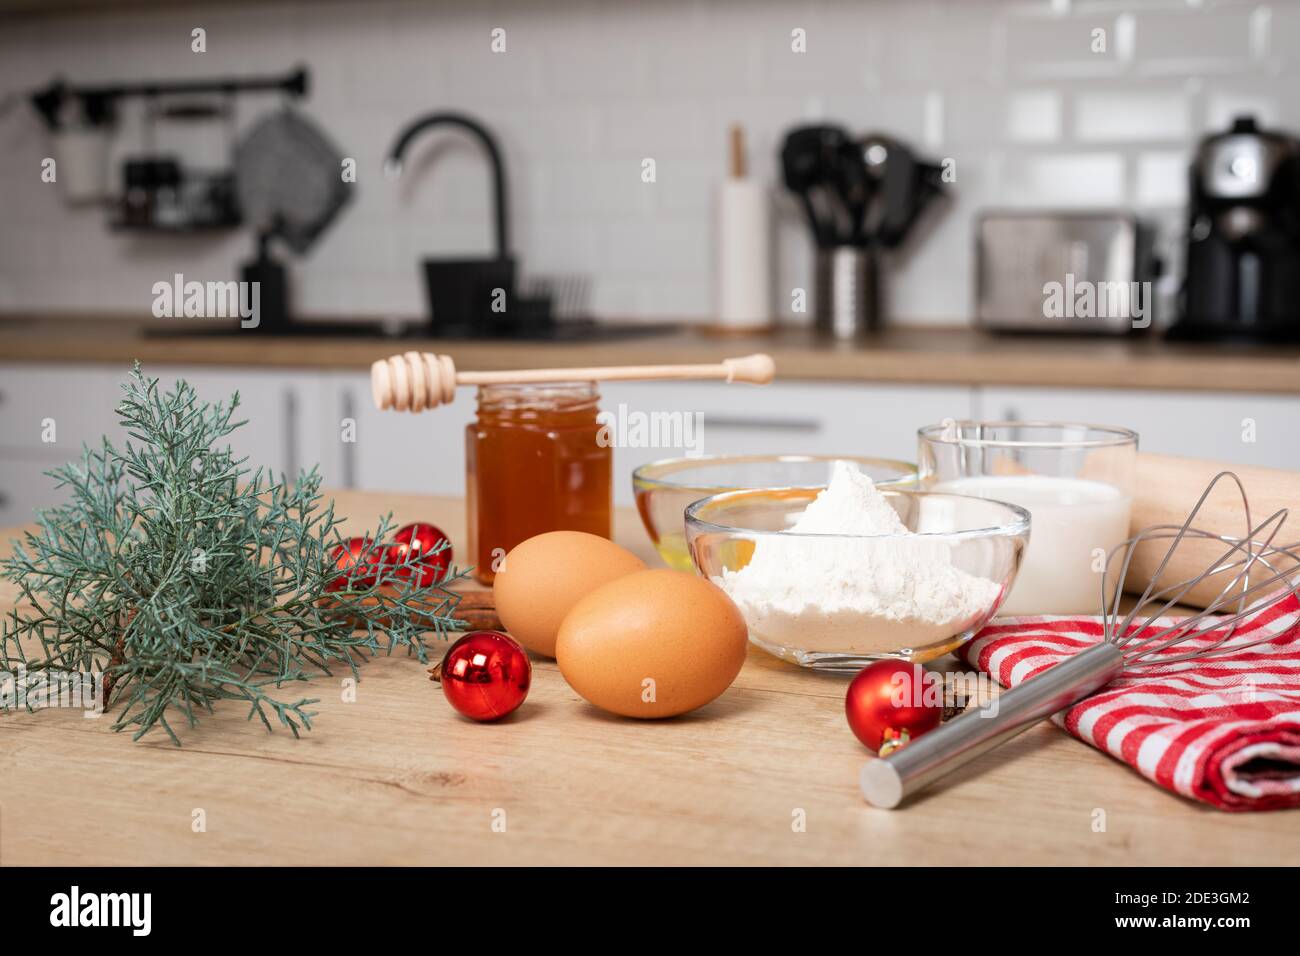 Homemade gingerbread ingredients on wooden table - Advent activity tradition, Christmas recipes Stock Photo